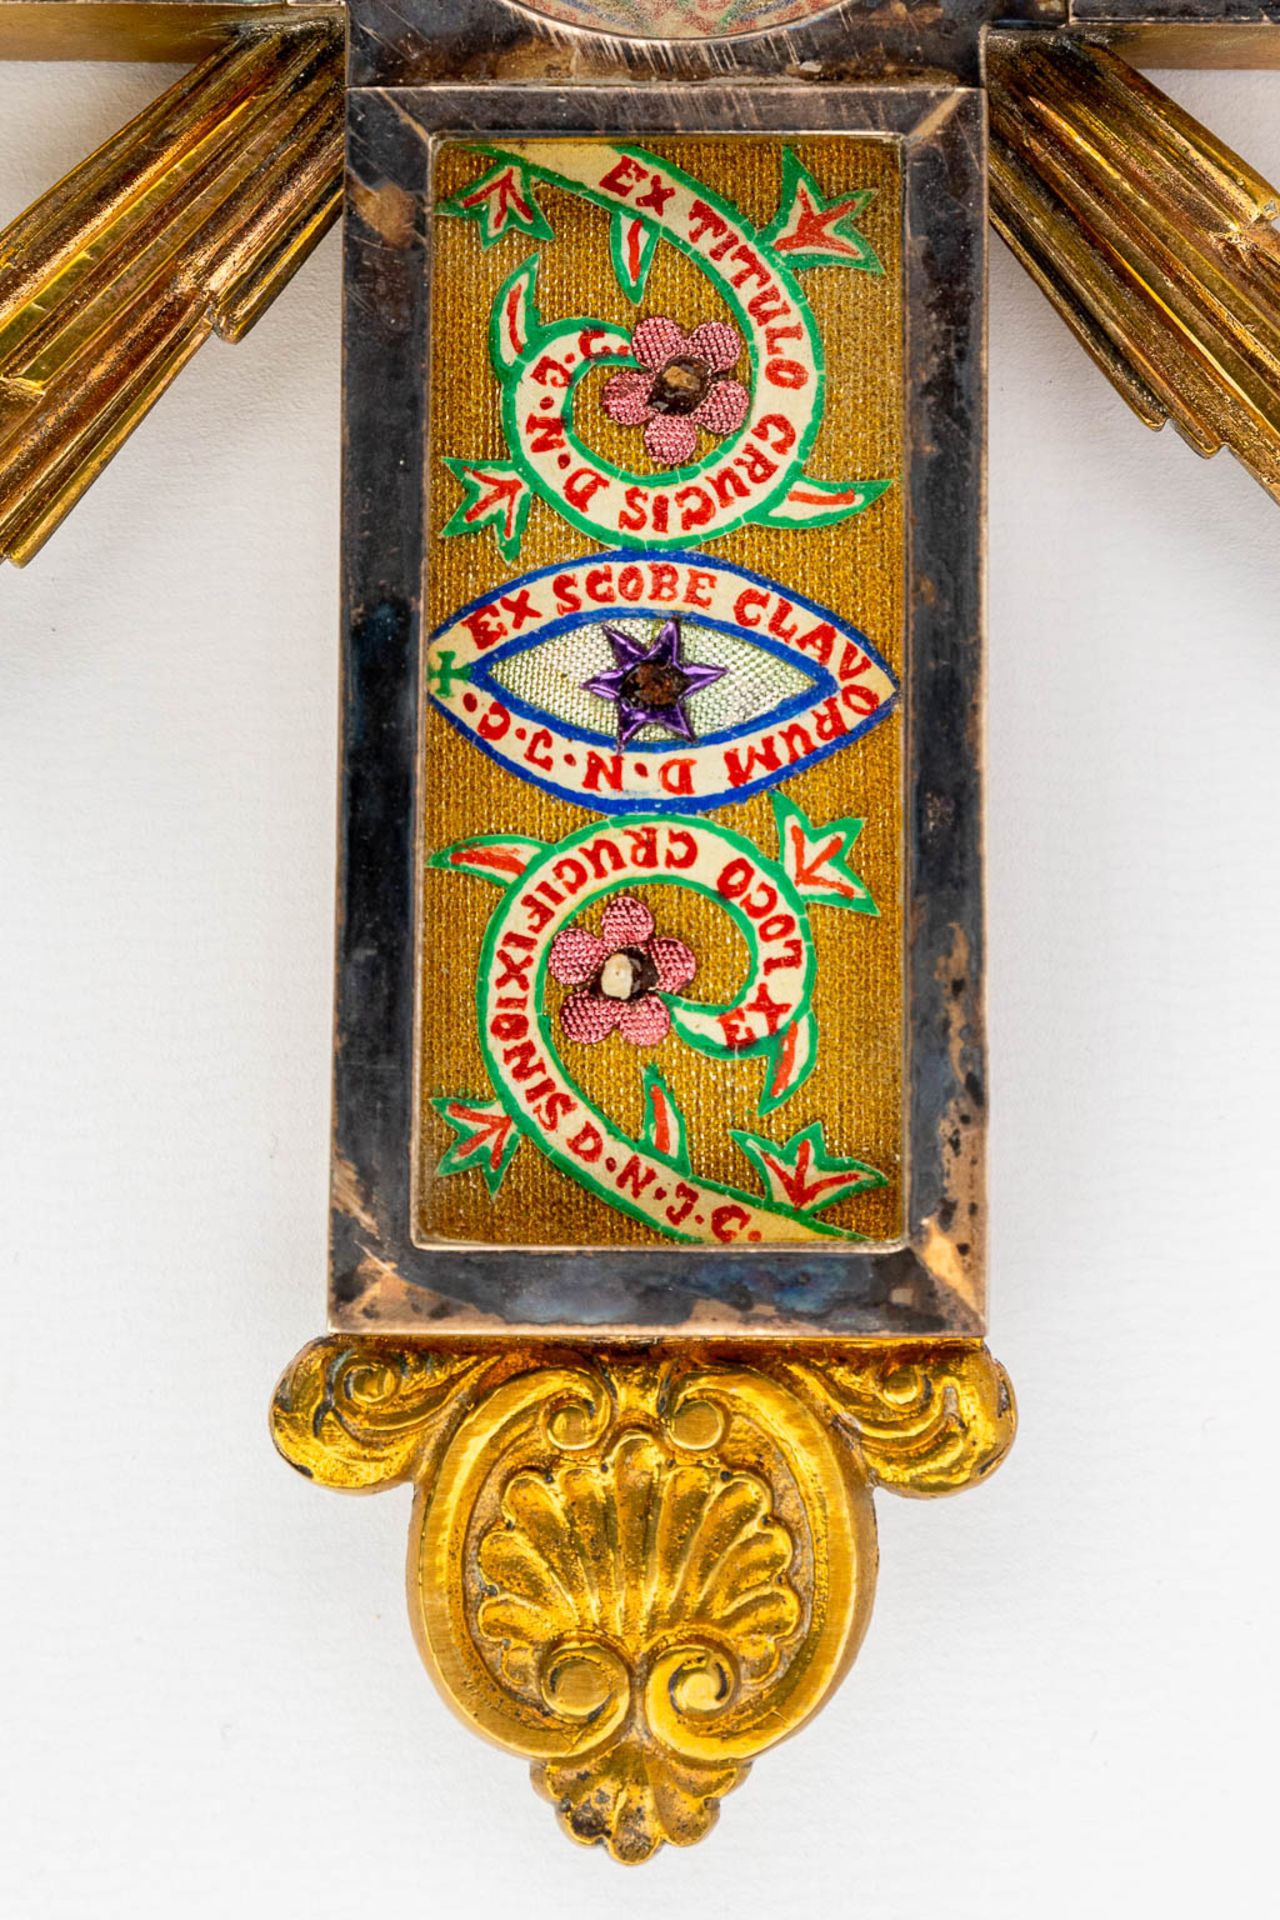 An antique reliquary box with relics a relic crucifix and embroidery. (L:13 x W:52 x H:75 cm) - Image 17 of 23